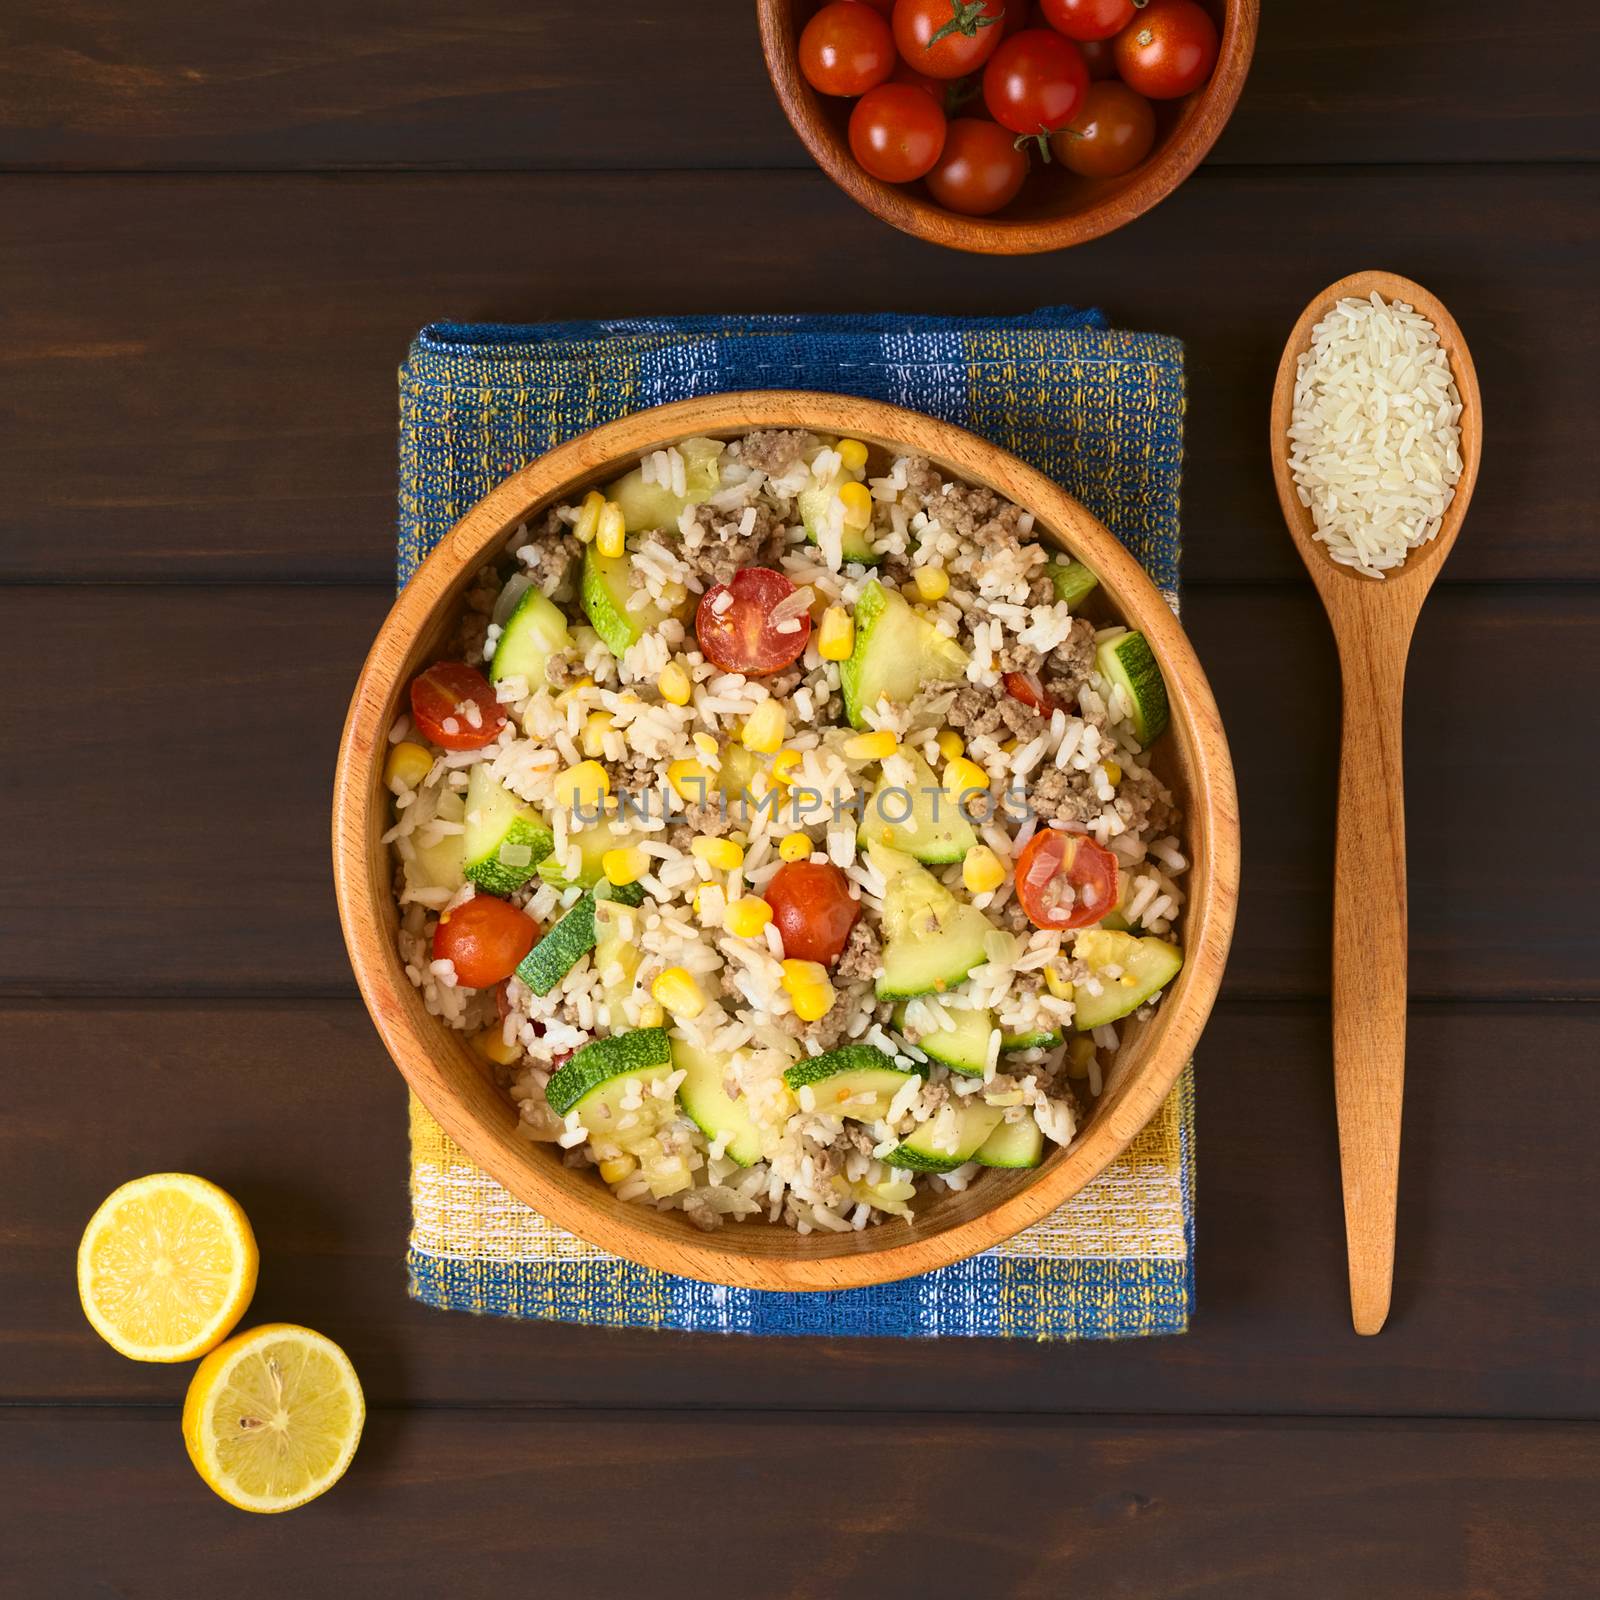 Overhead shot of rice dish with mincemeat and vegetables (sweet corn, cherry tomato, zucchini, onion) in wooden bowl with ingredients on the side, photographed on dish towel on dark wood with natural light